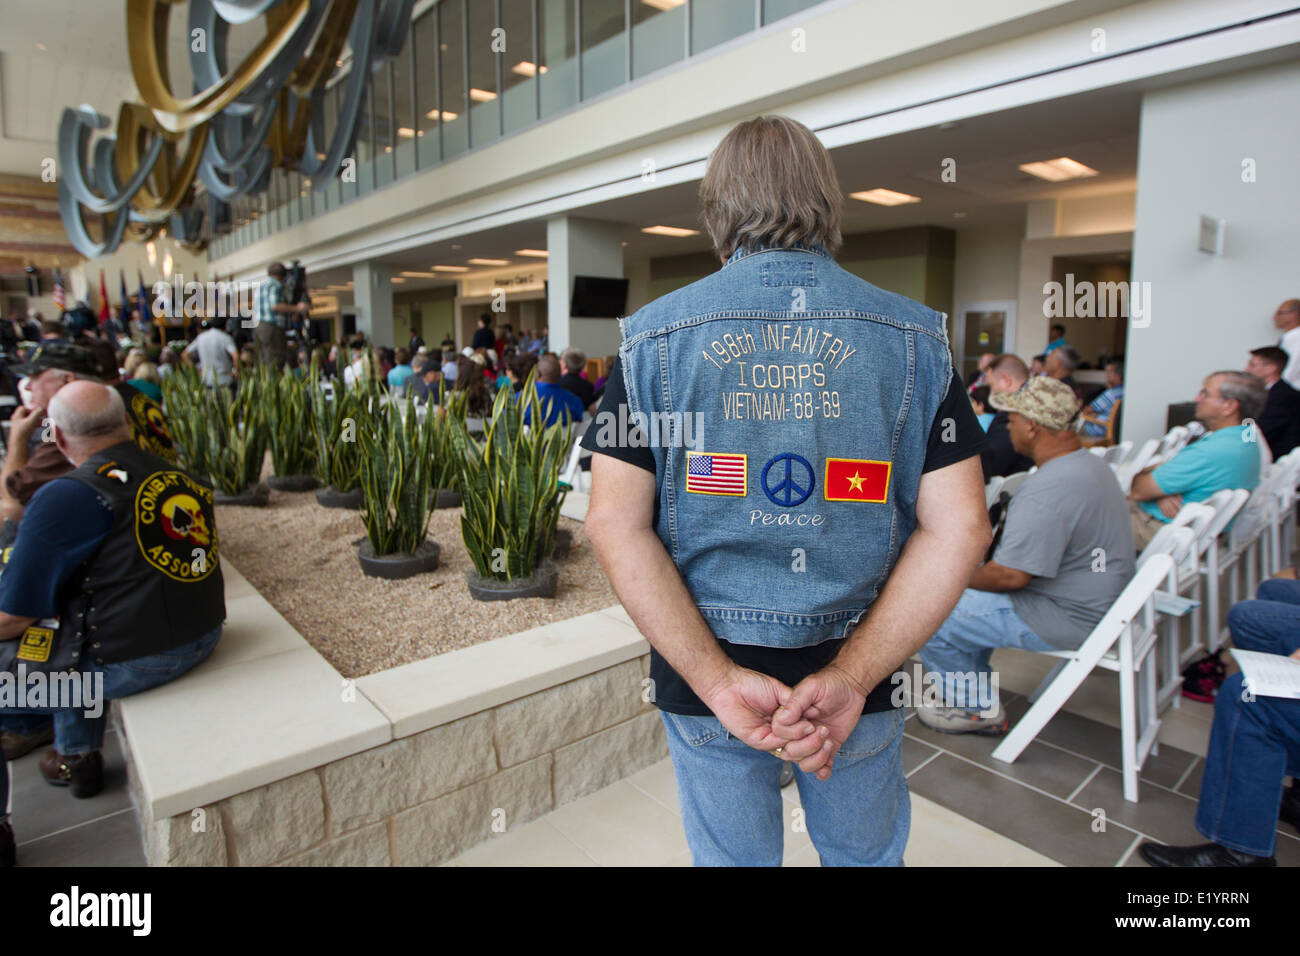 U.S. military veteran waits in the lobby area during grand opening of Veterans Administration outpatient clinic in Austin TX. Stock Photo